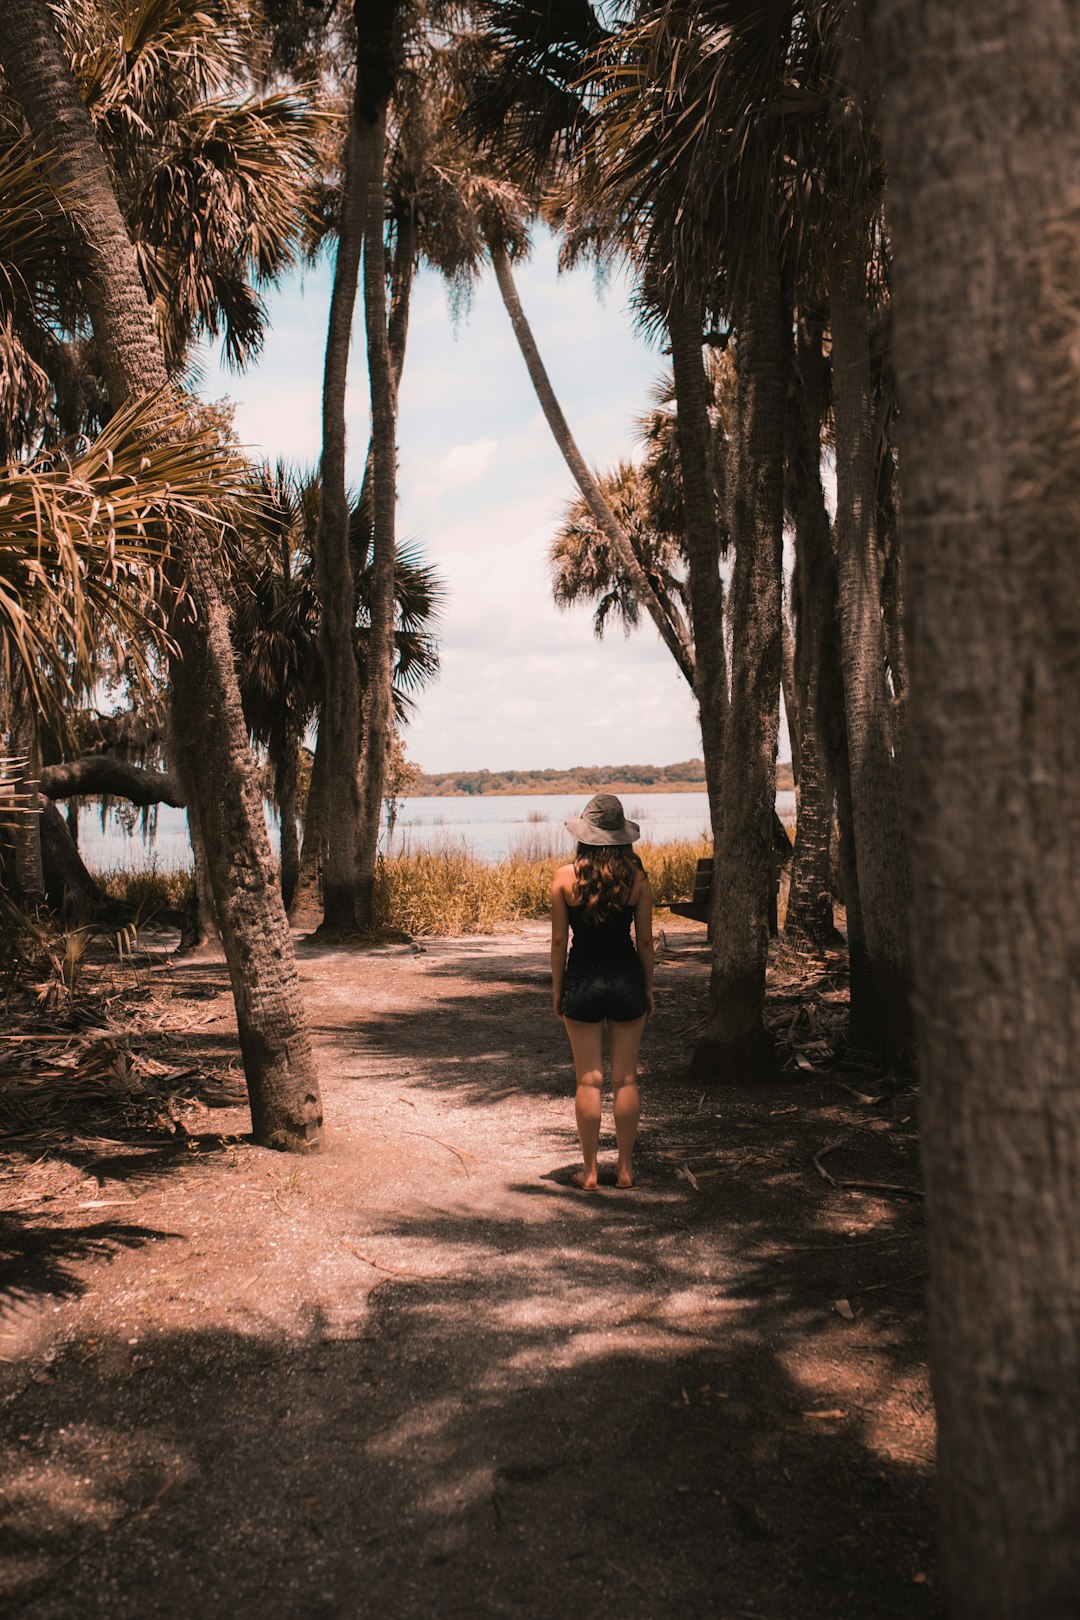 Travel Tips and Stories of Myakka River State Park in United States